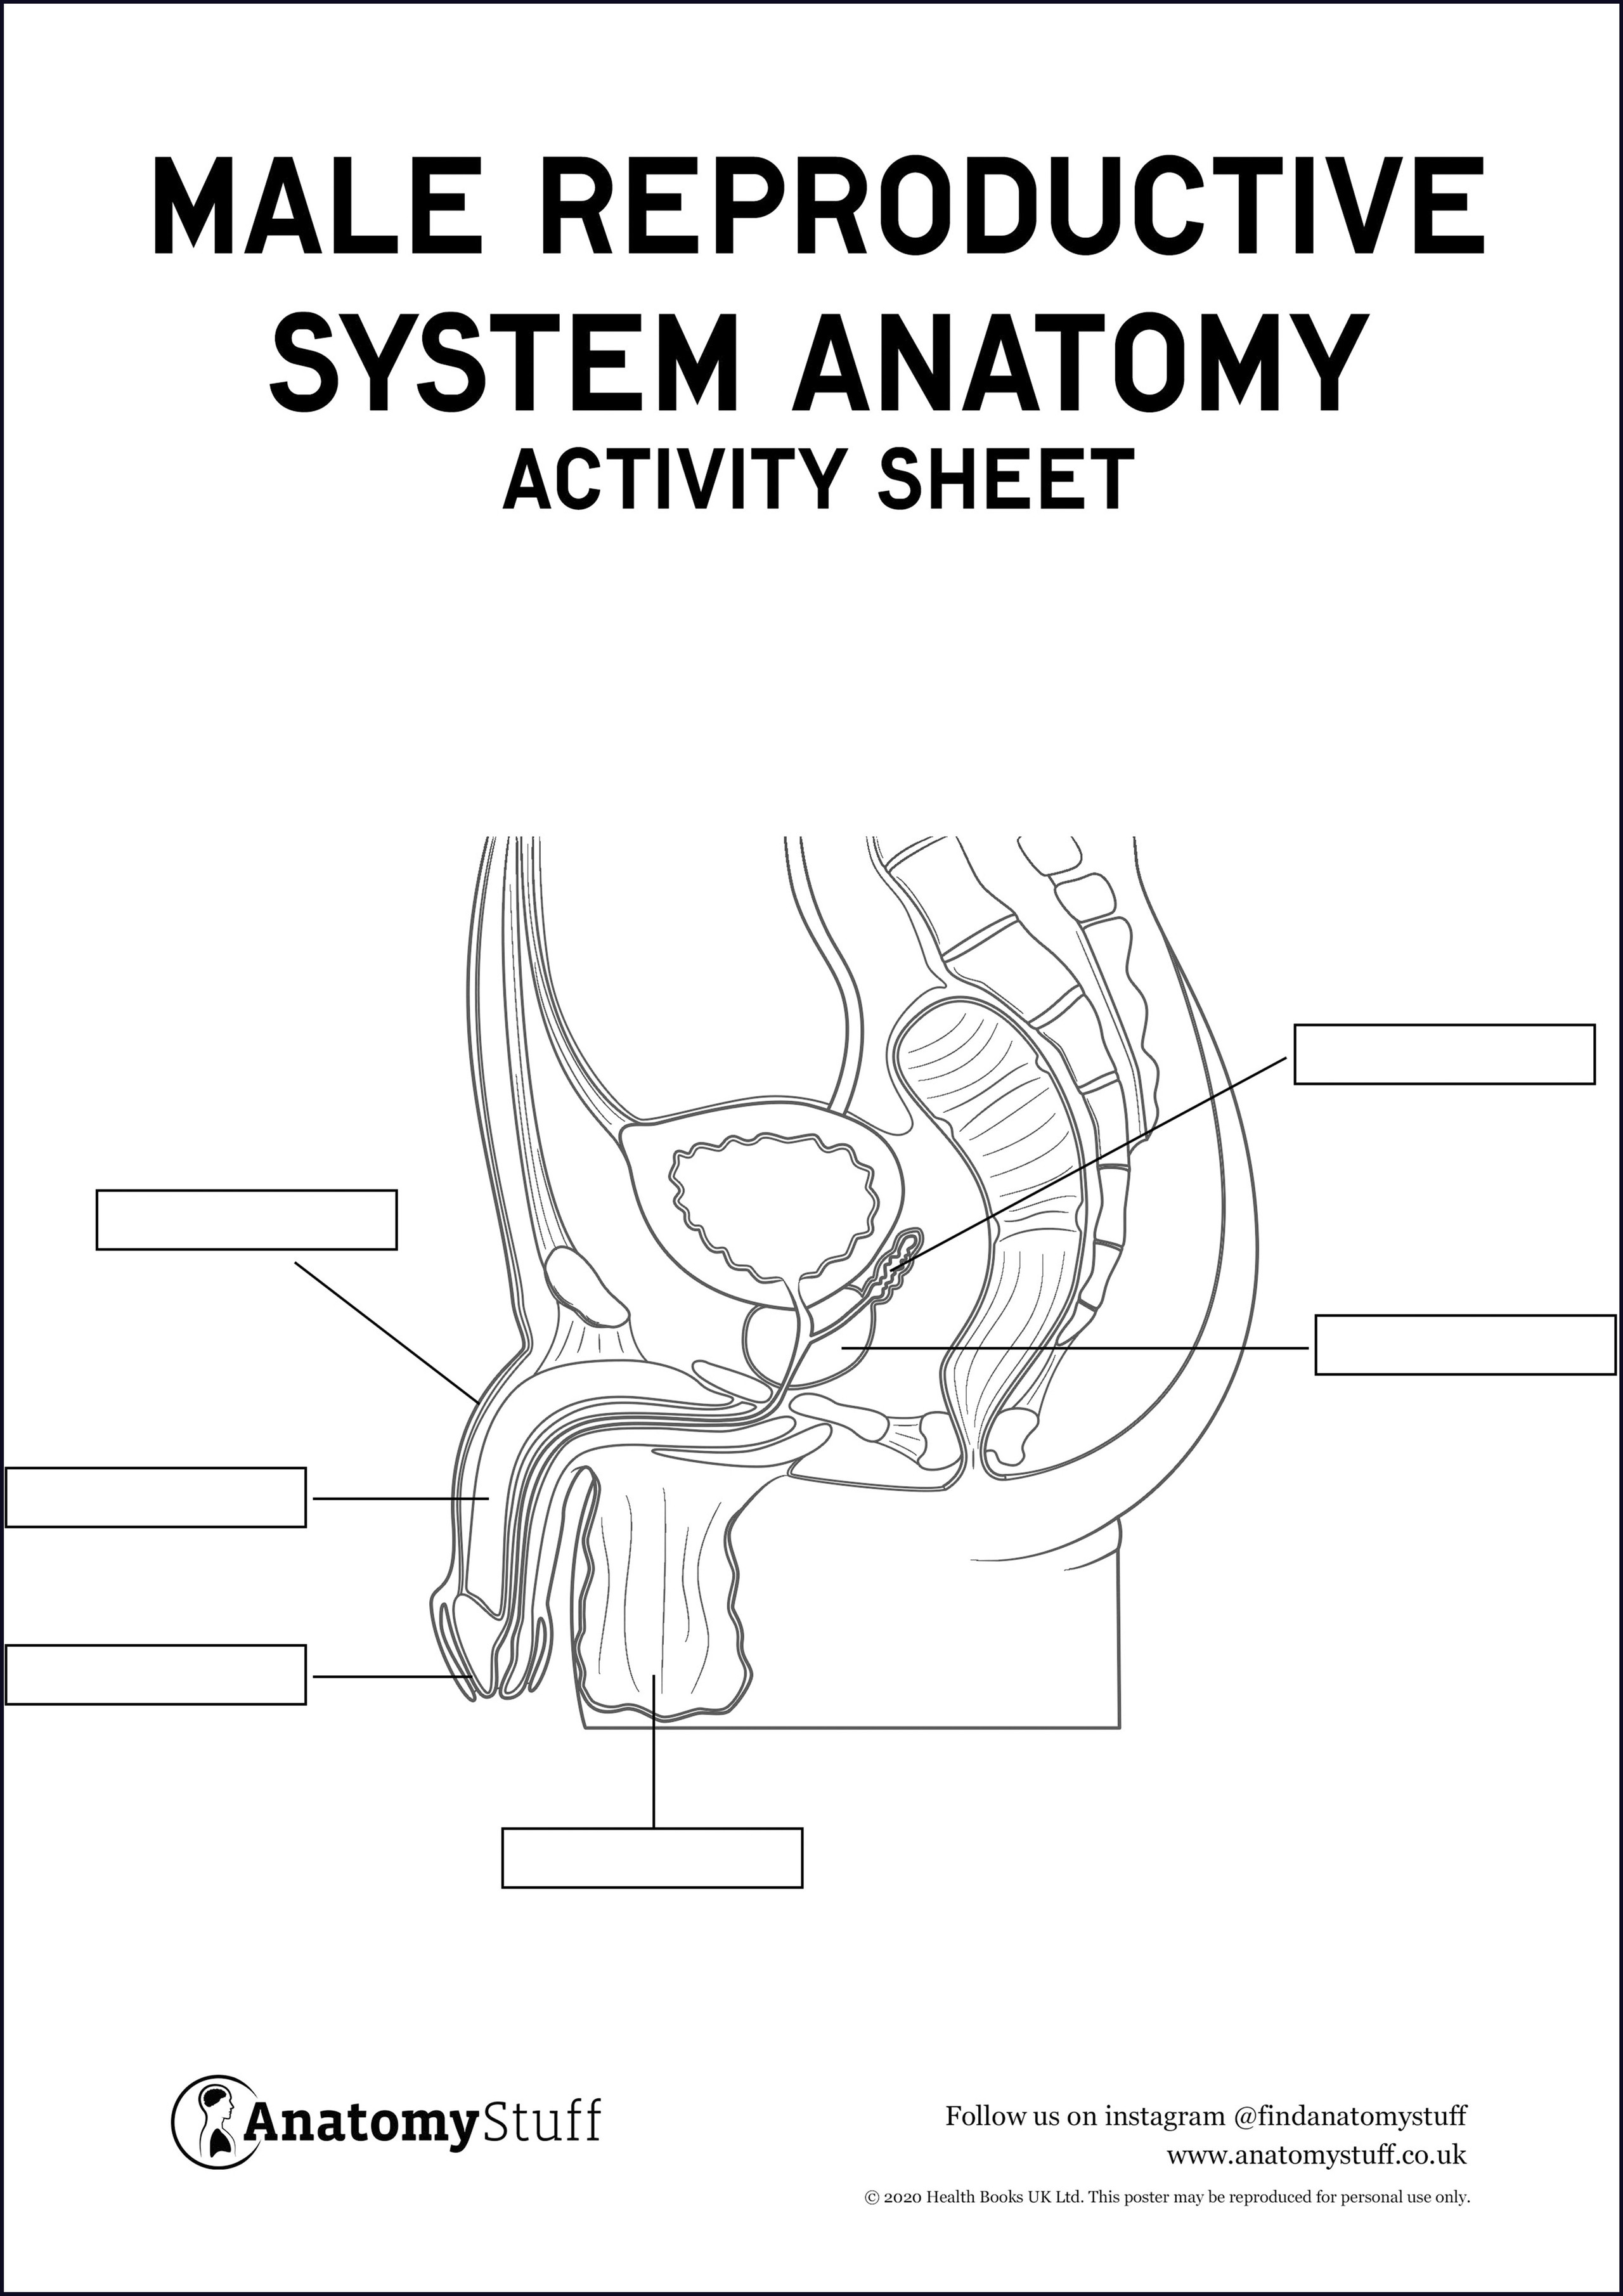 Male Reproductive System Anatomy Activity Sheet Pdf 2492